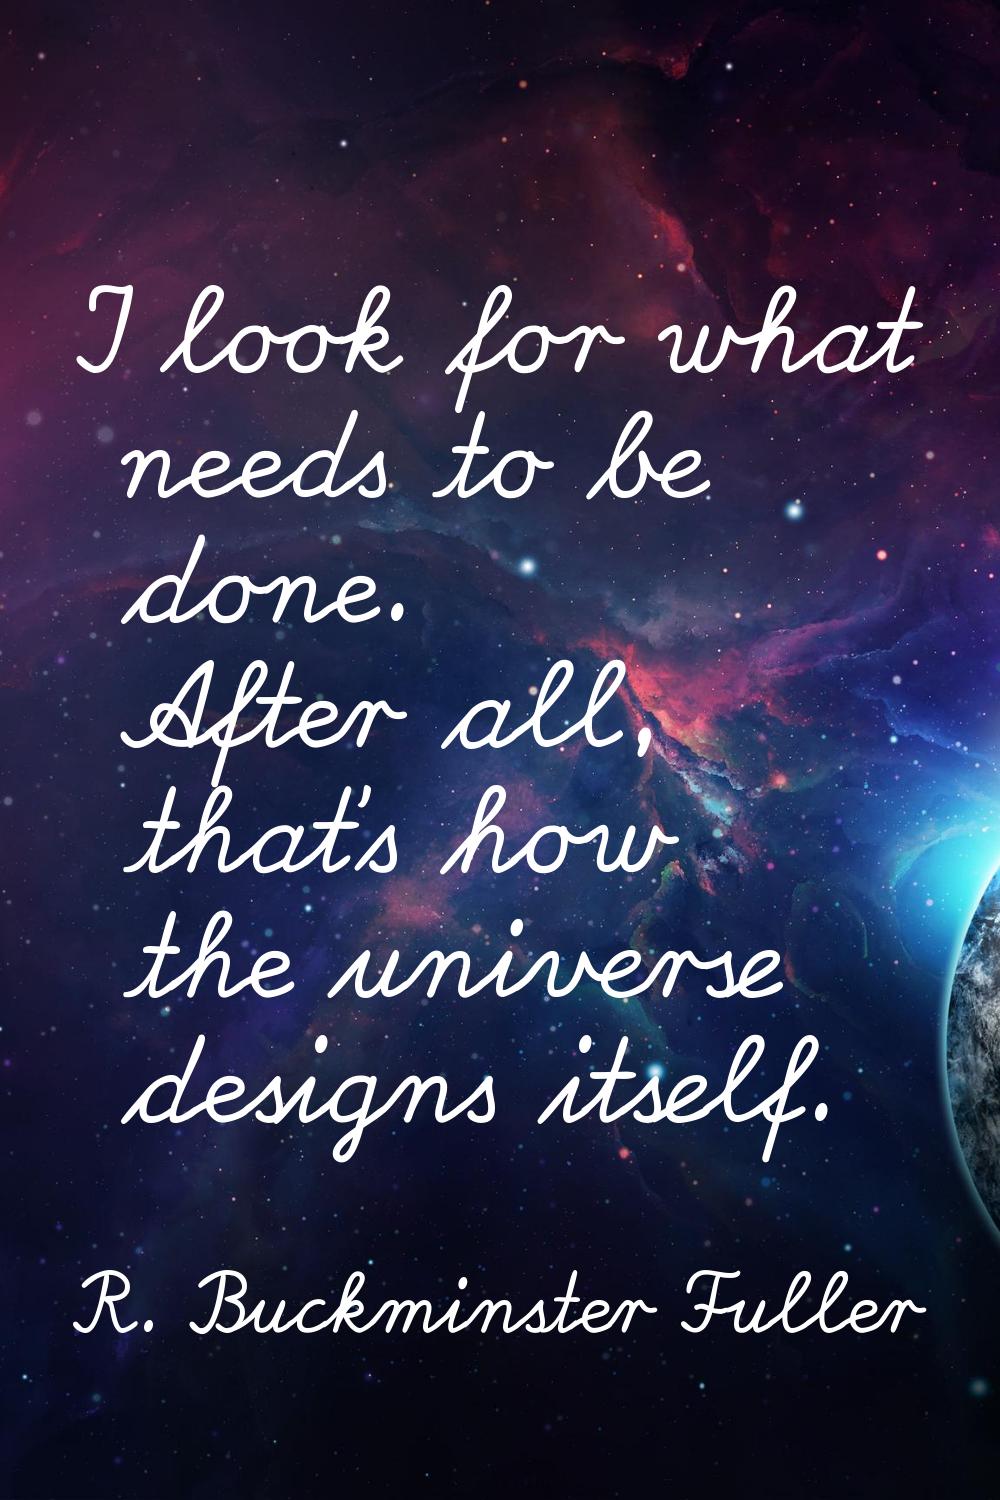 I look for what needs to be done. After all, that's how the universe designs itself.